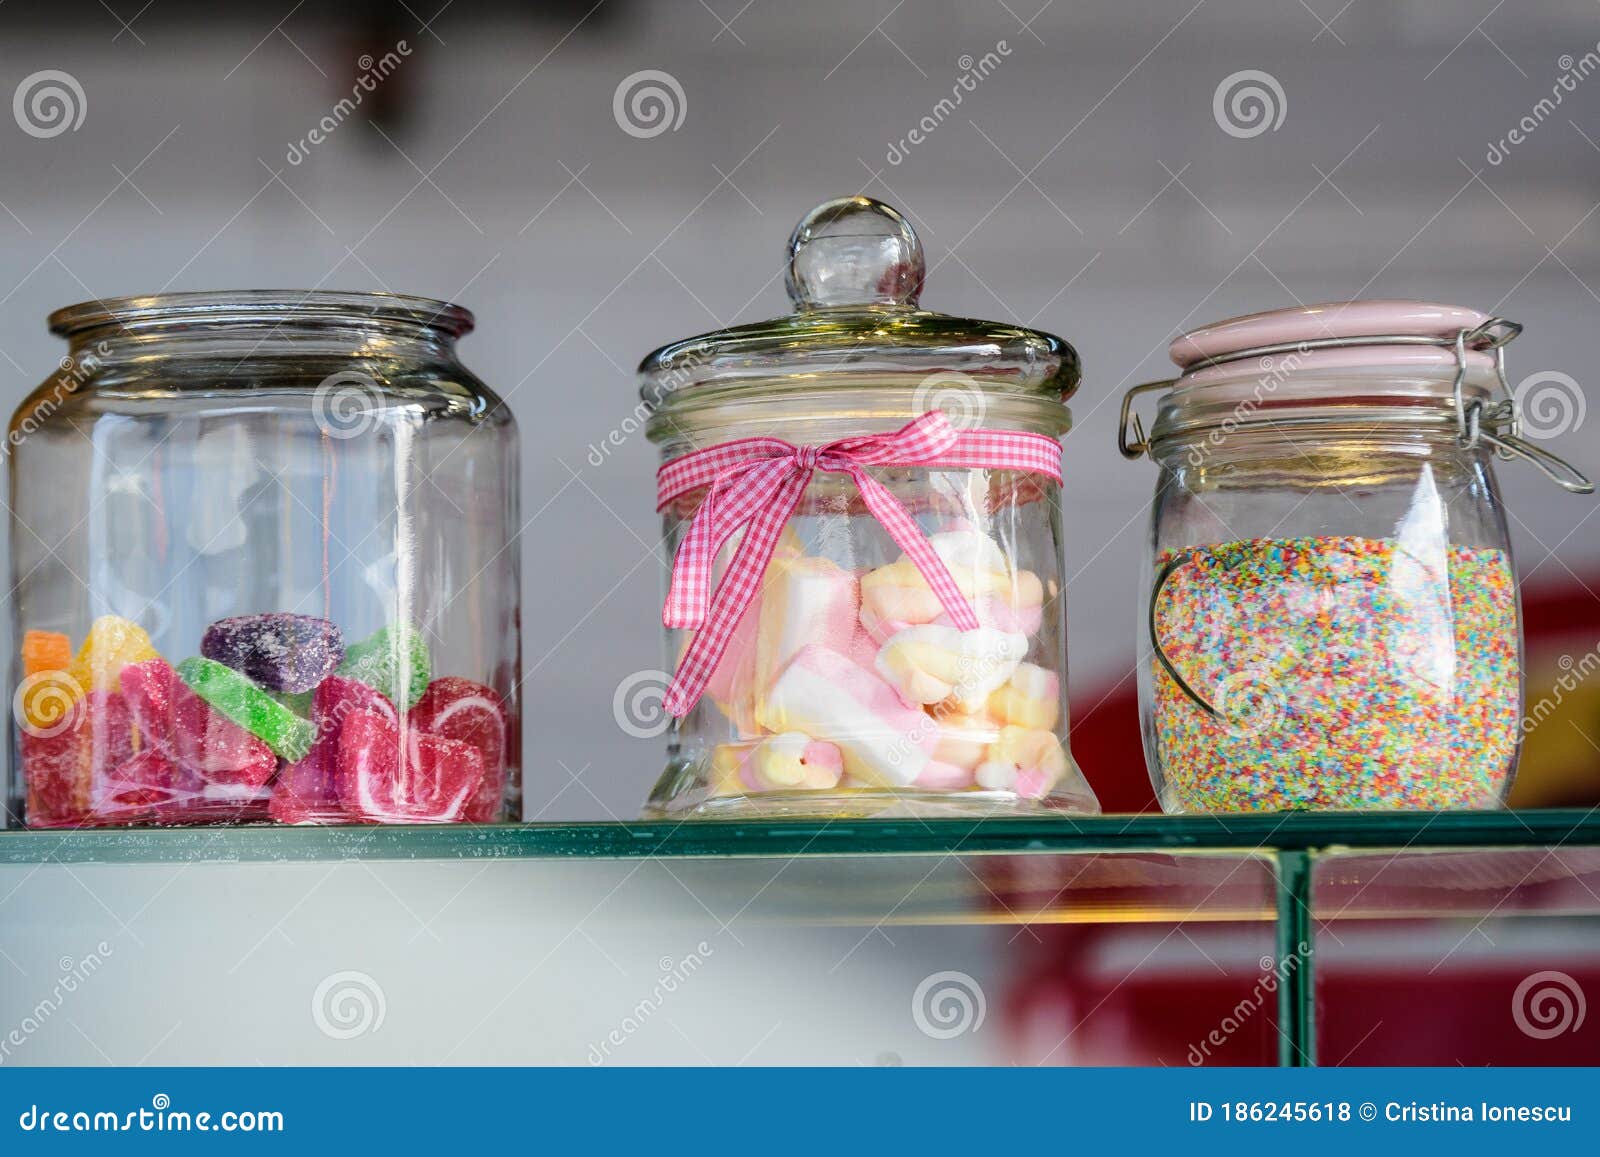 https://thumbs.dreamstime.com/z/three-glass-jars-colorful-sugar-sweets-candies-marshmallows-sprinkles-used-to-decorate-ice-cream-desserts-display-186245618.jpg